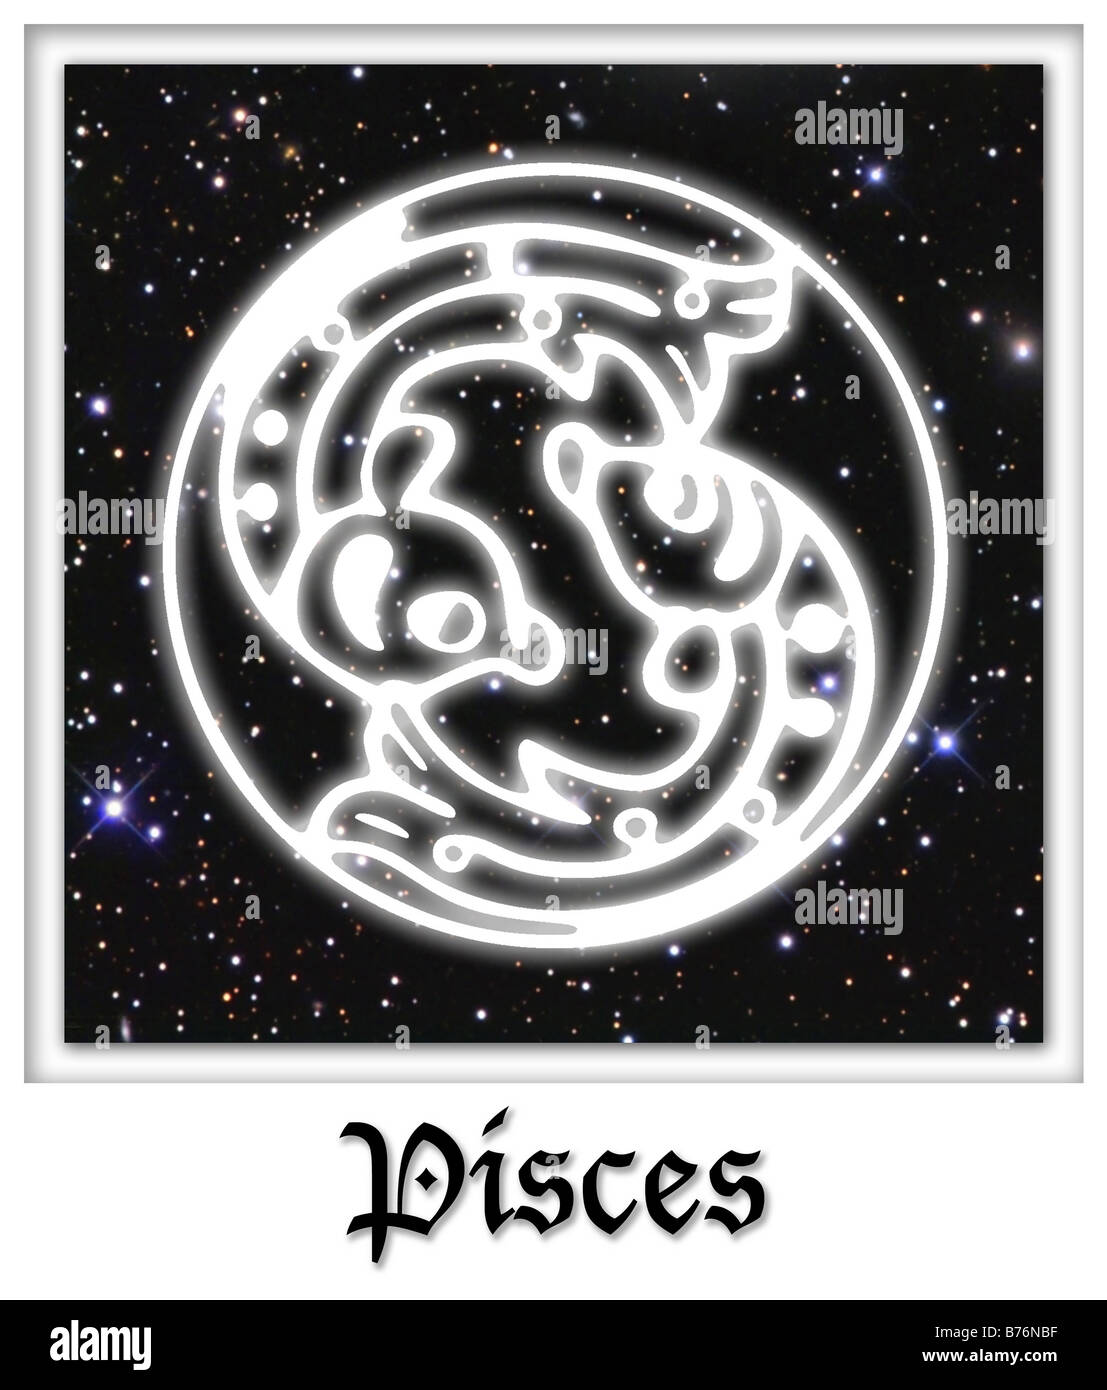 Pisces Astrological Astrology Horoscope Birth Sign Stock Photo